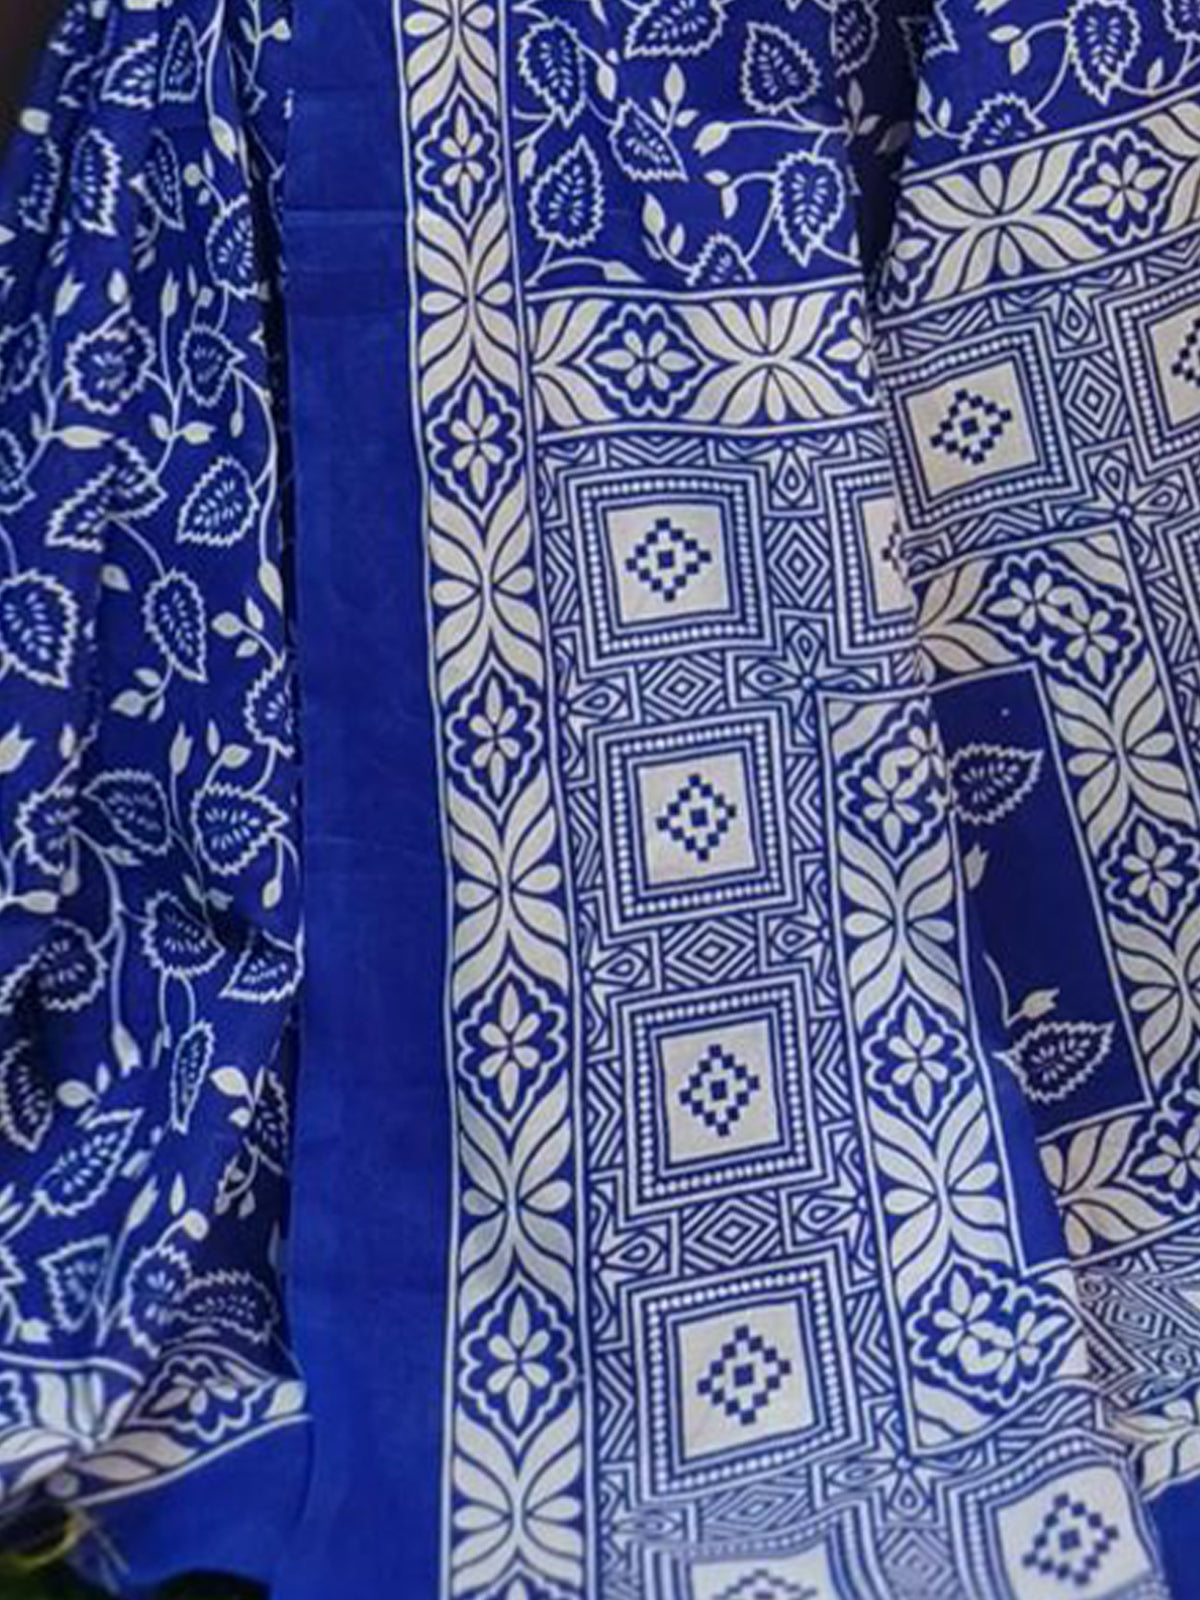 Odette Blue Cotton Printed Saree With Unstitched Blouse For Women